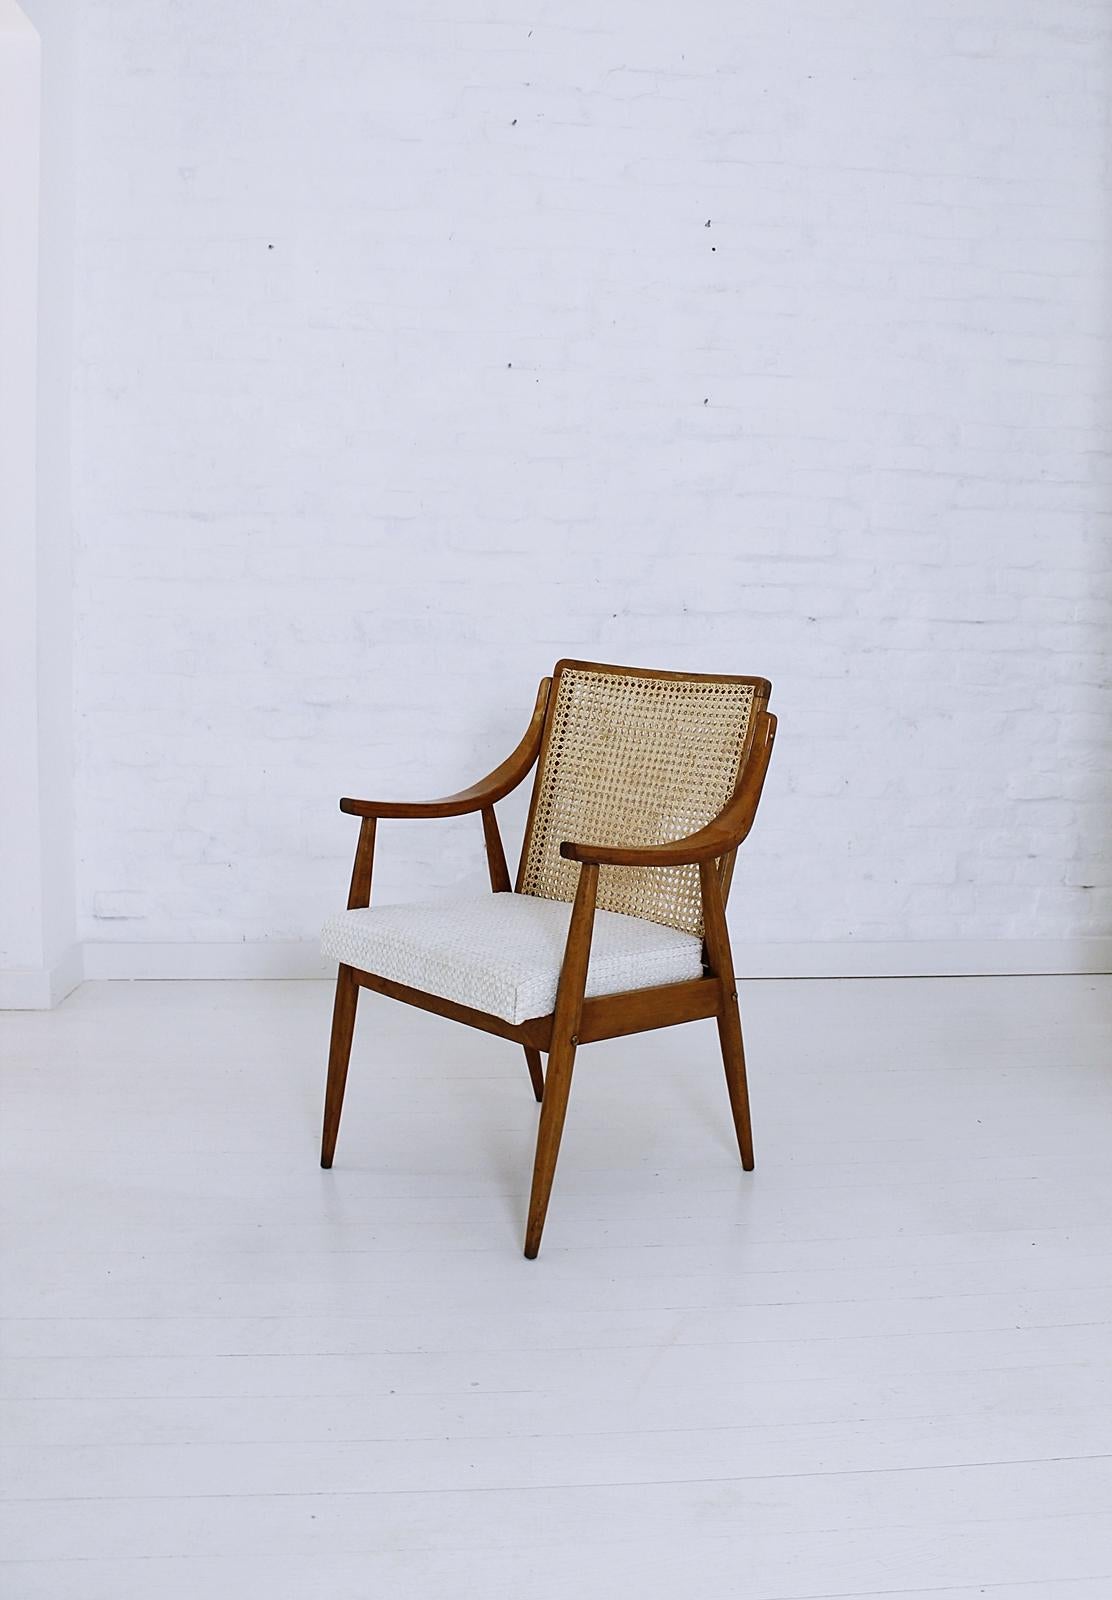 Rare Mid-Century Modern Hungarian armchair in style of Peter Hvidt and Orla Mølgaard-Nielsen, in very good condition.
This chair in beechwood with double caned back is newly upholstered.